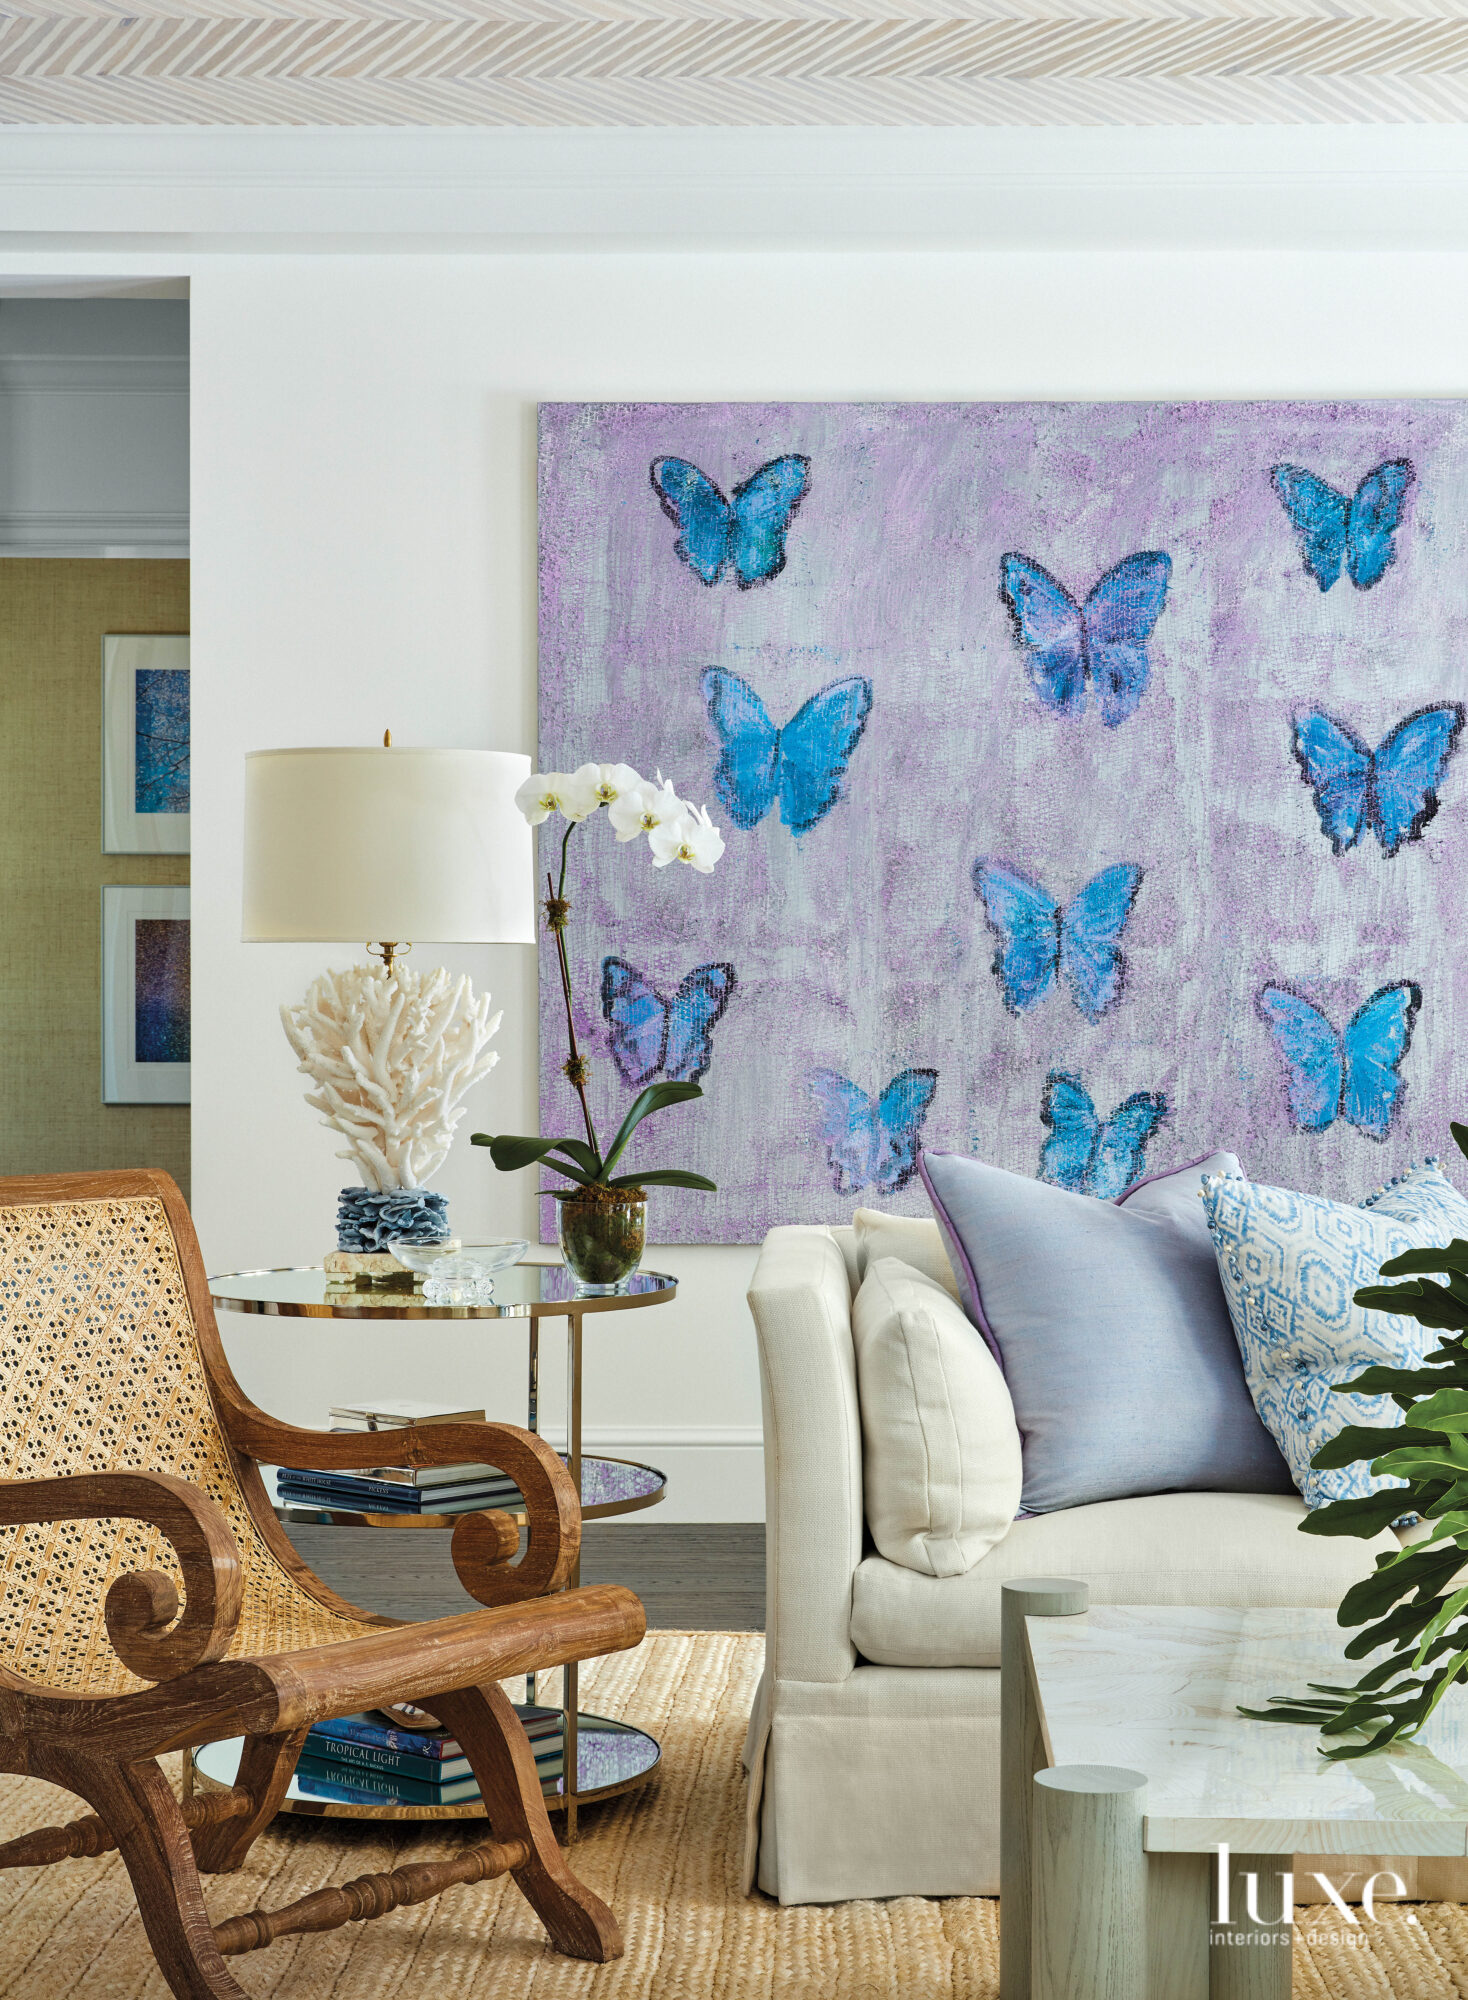 Living area with blue and purple butterfly artwork on wall.